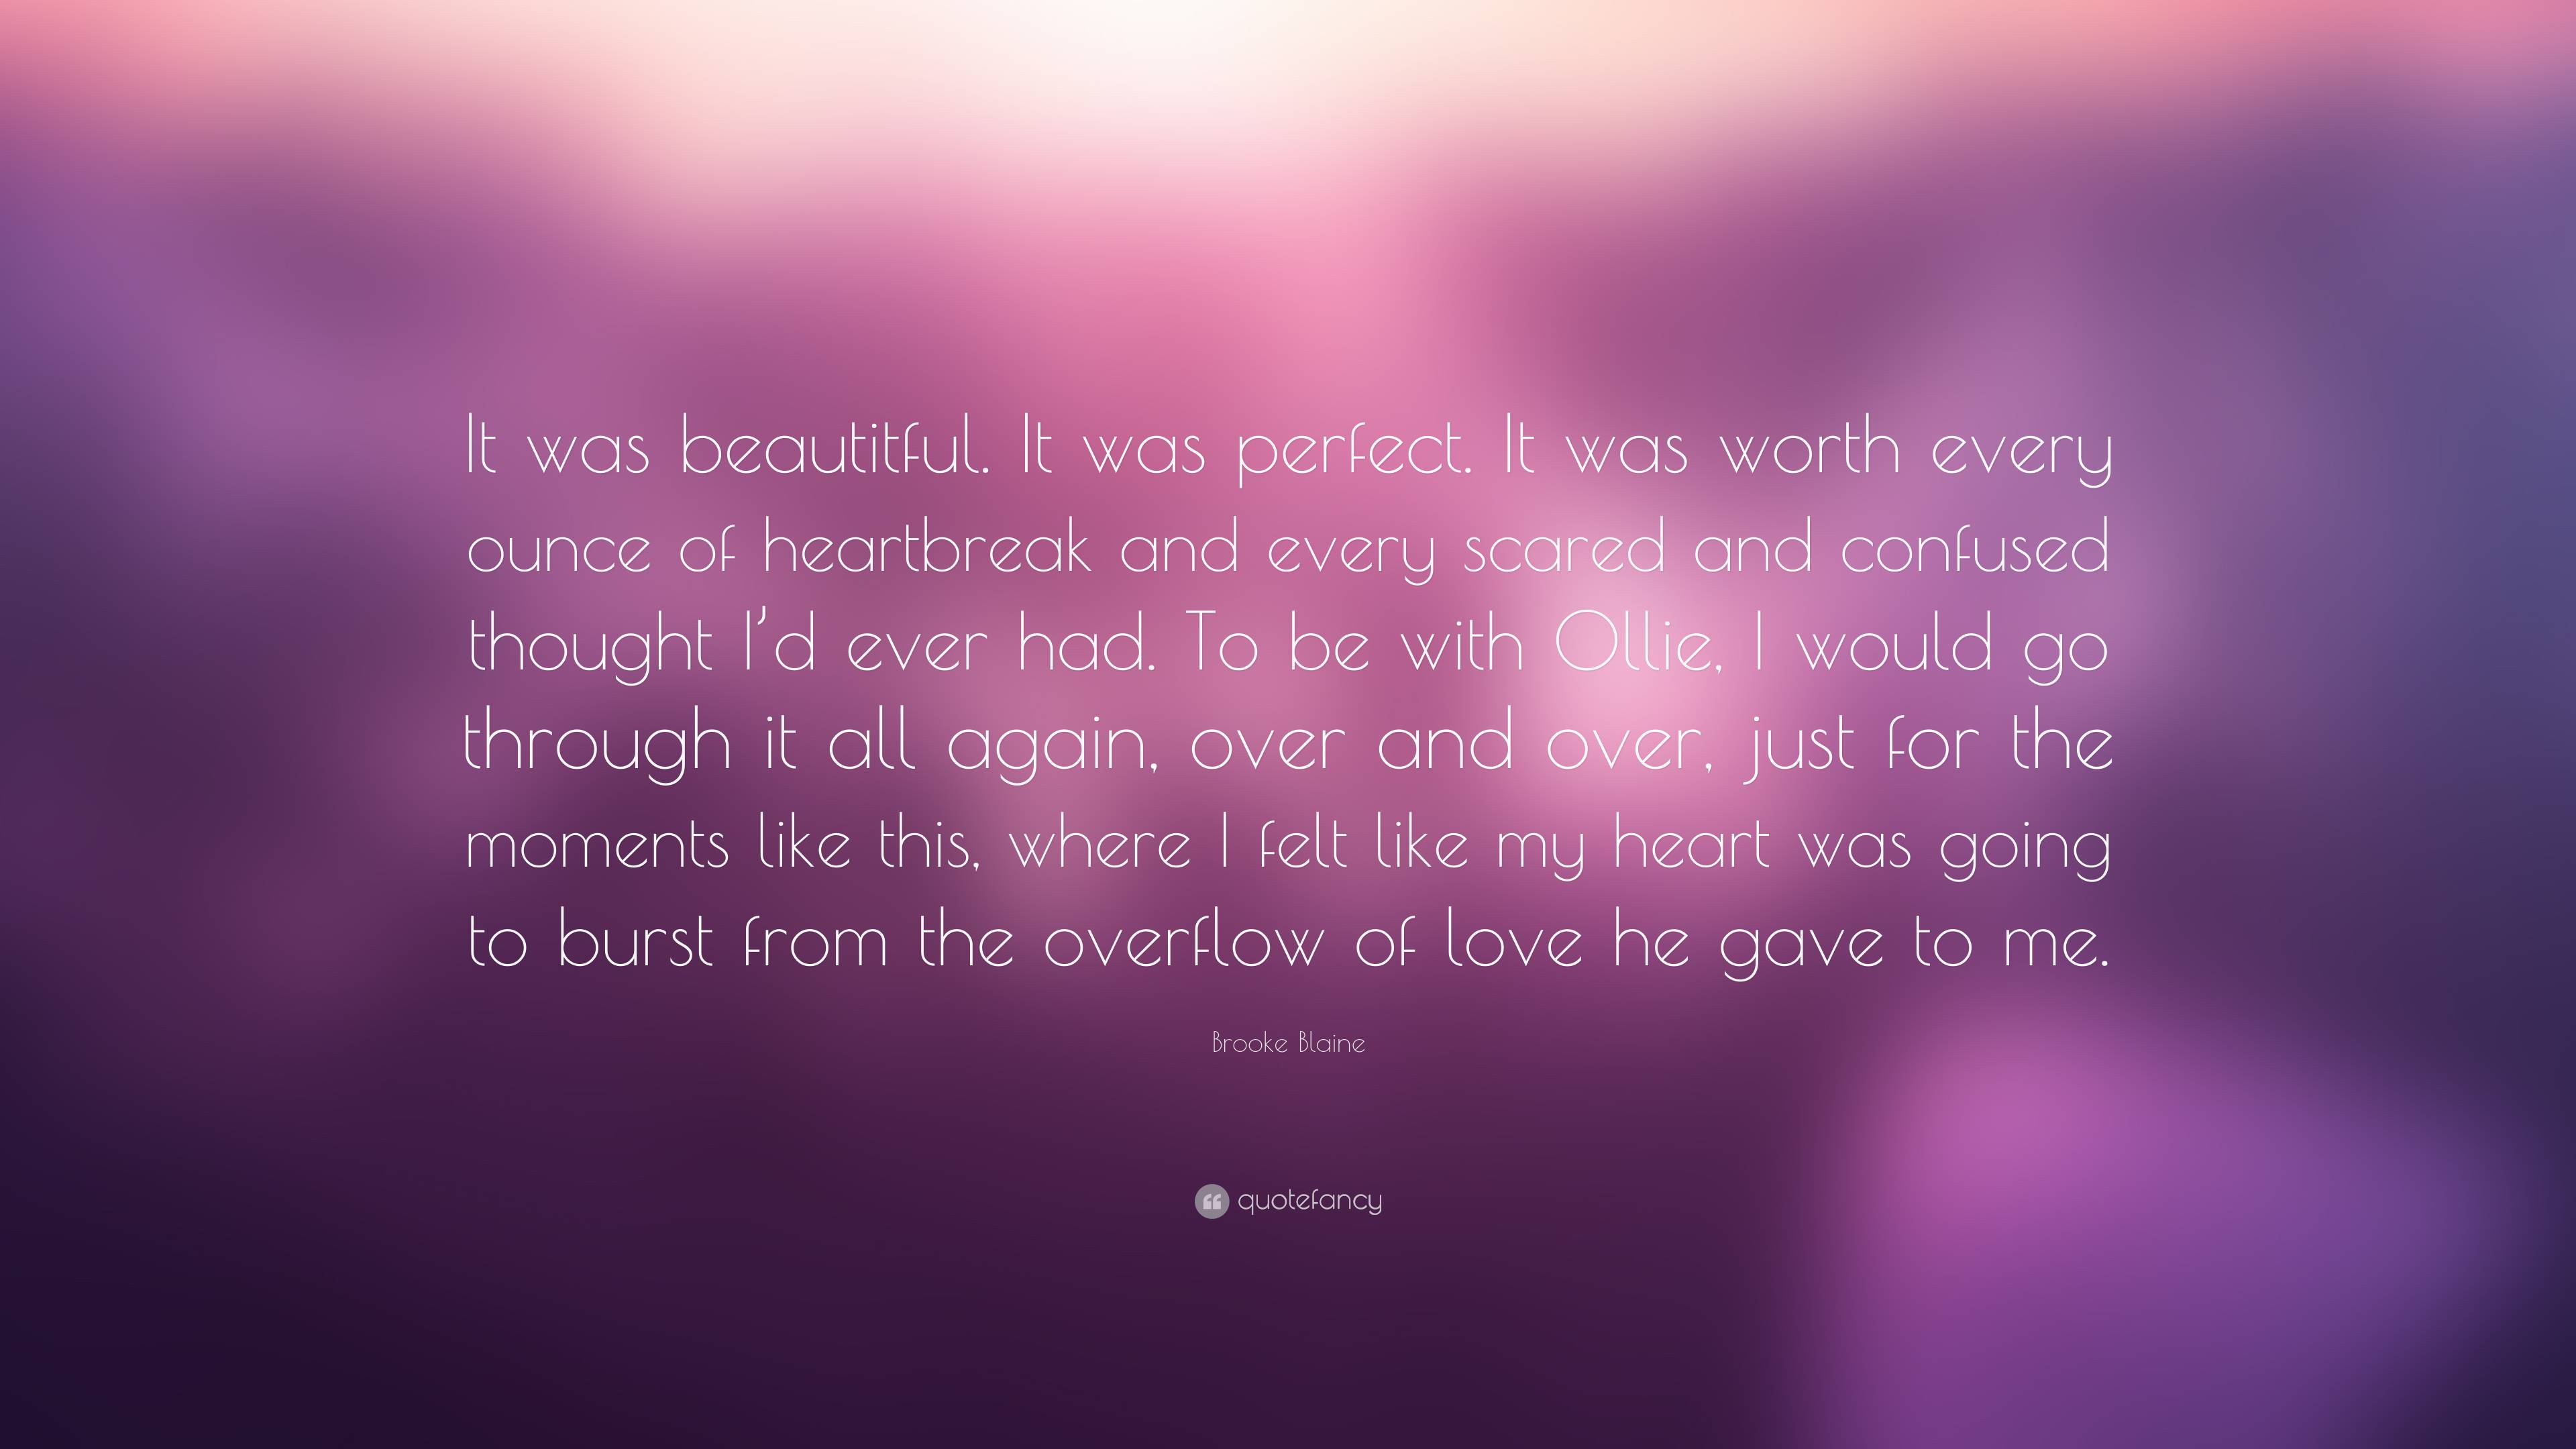 Brooke Blaine Quote: “It was beautitful. It was perfect. It was worth ...